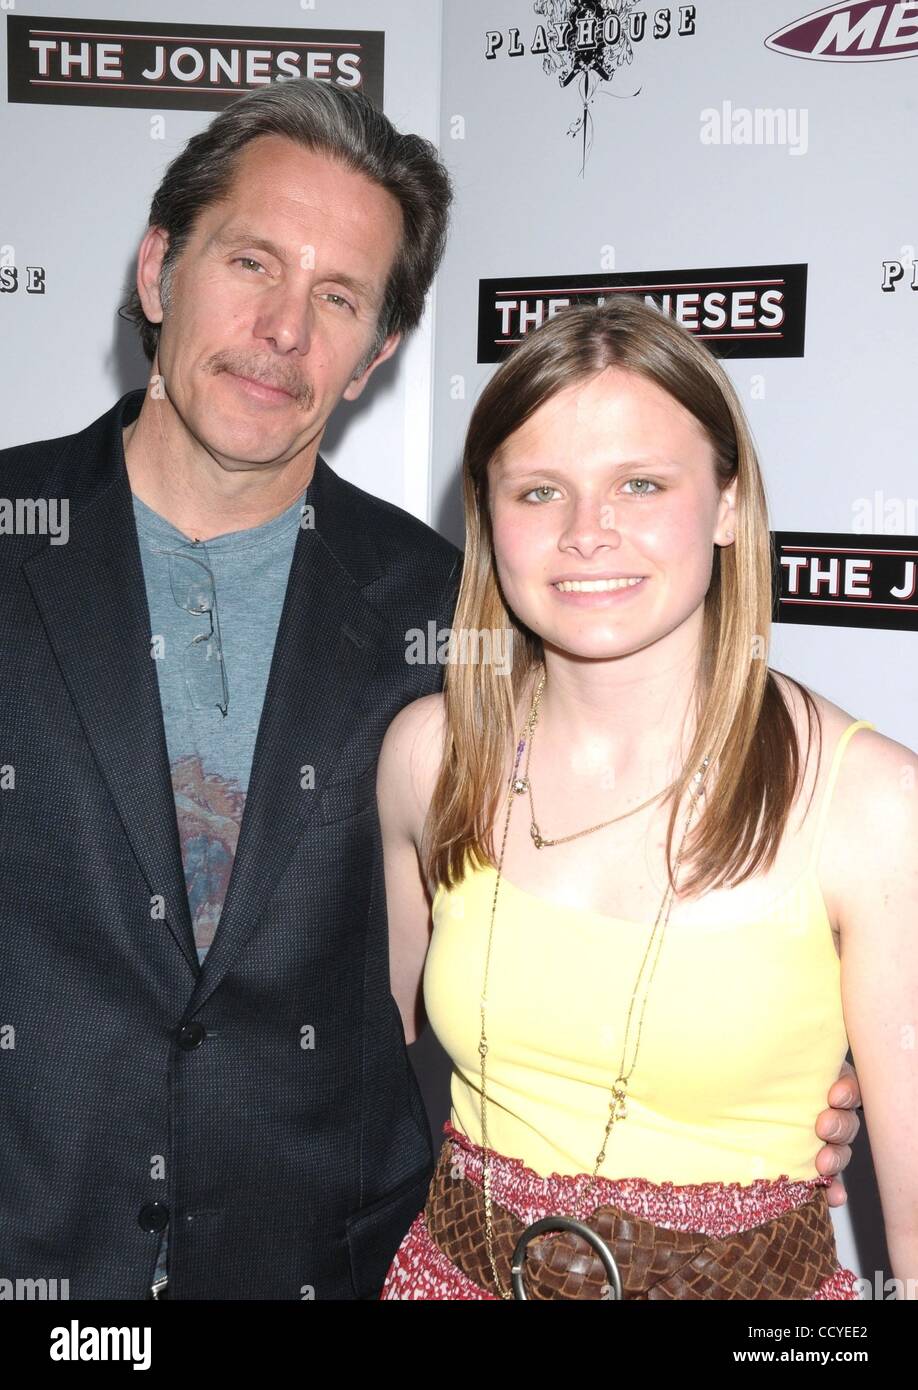 Apr 08, 2010 - Los Angeles, California, USA - Actor GARY COLE and daughter MARY COLE  at the 'The Joneses' Los Angeles Premiere held at the ArcLight Hollywood. (Credit Image: Â© Paul Fenton/ZUMA Press) Stock Photo